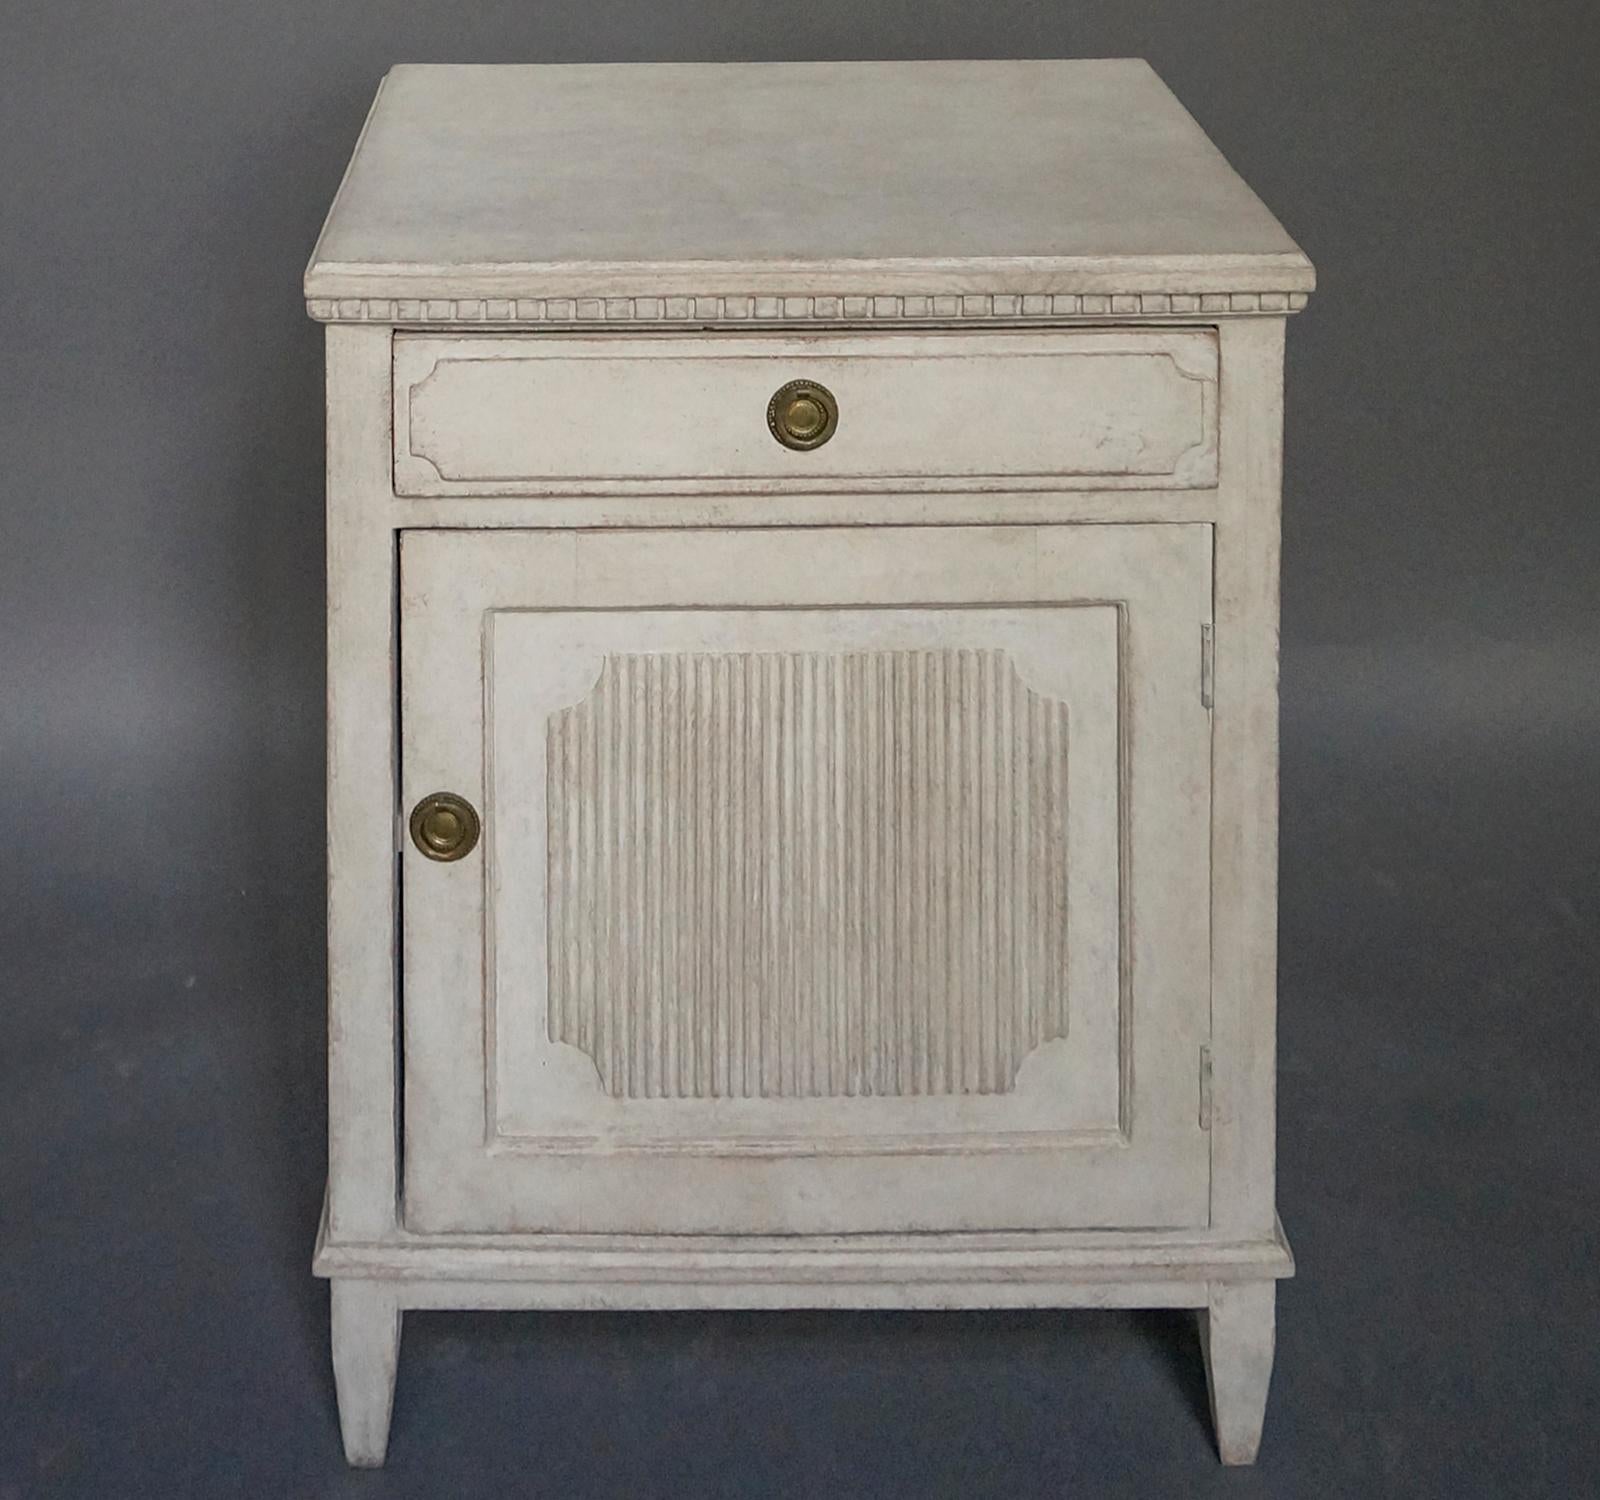 Half-height cabinet, Sweden circa 1870, in the Gustavian style with a single drawer over a full width door. Shaped top with dentil molding. Both the drawer and the door feature raised panels, with the door having vertical reeding. Single fixed shelf